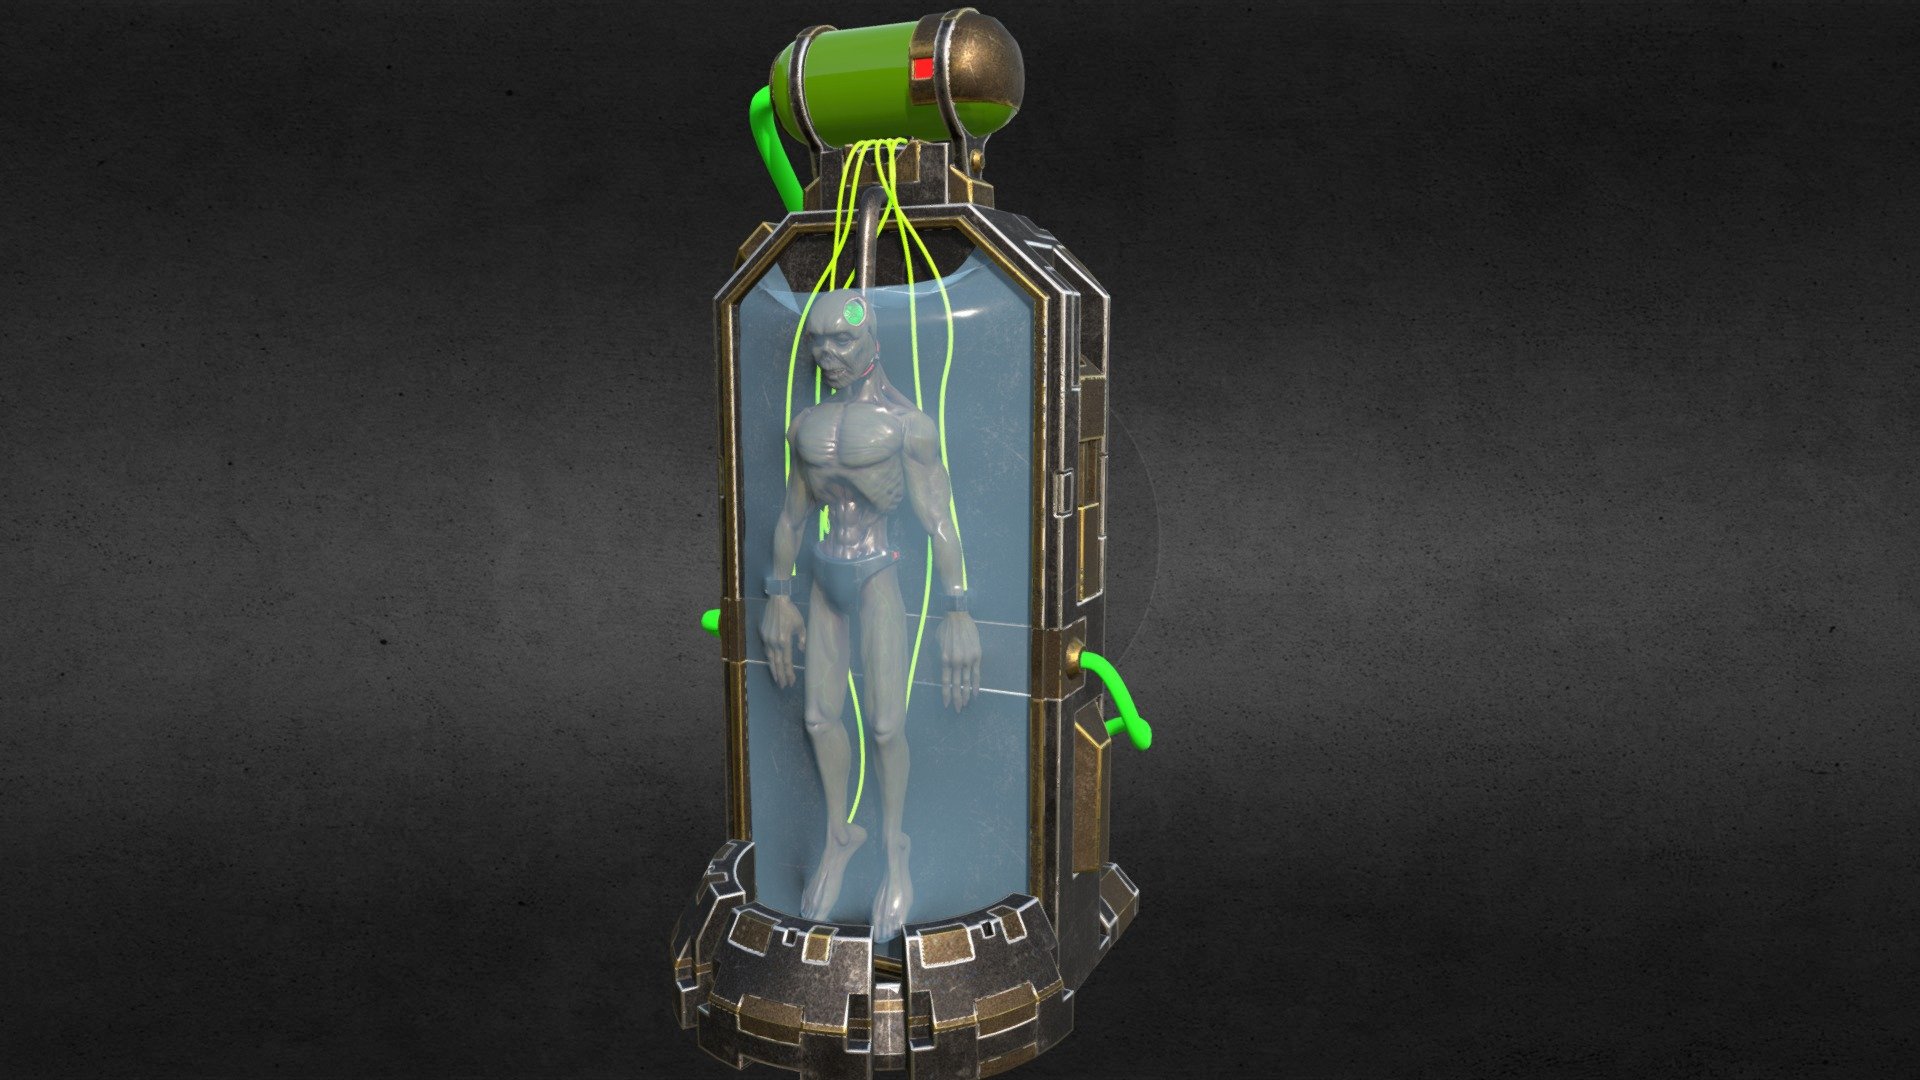 Scifi Zombie Incubator Asset for games.
Includes UnityPackage for easy install (also with higher resolution textures).

Zombie: https://skfb.ly/6TouI - Scifi Zombie Incubator - Buy Royalty Free 3D model by Sampo (@pellemasi) 3d model